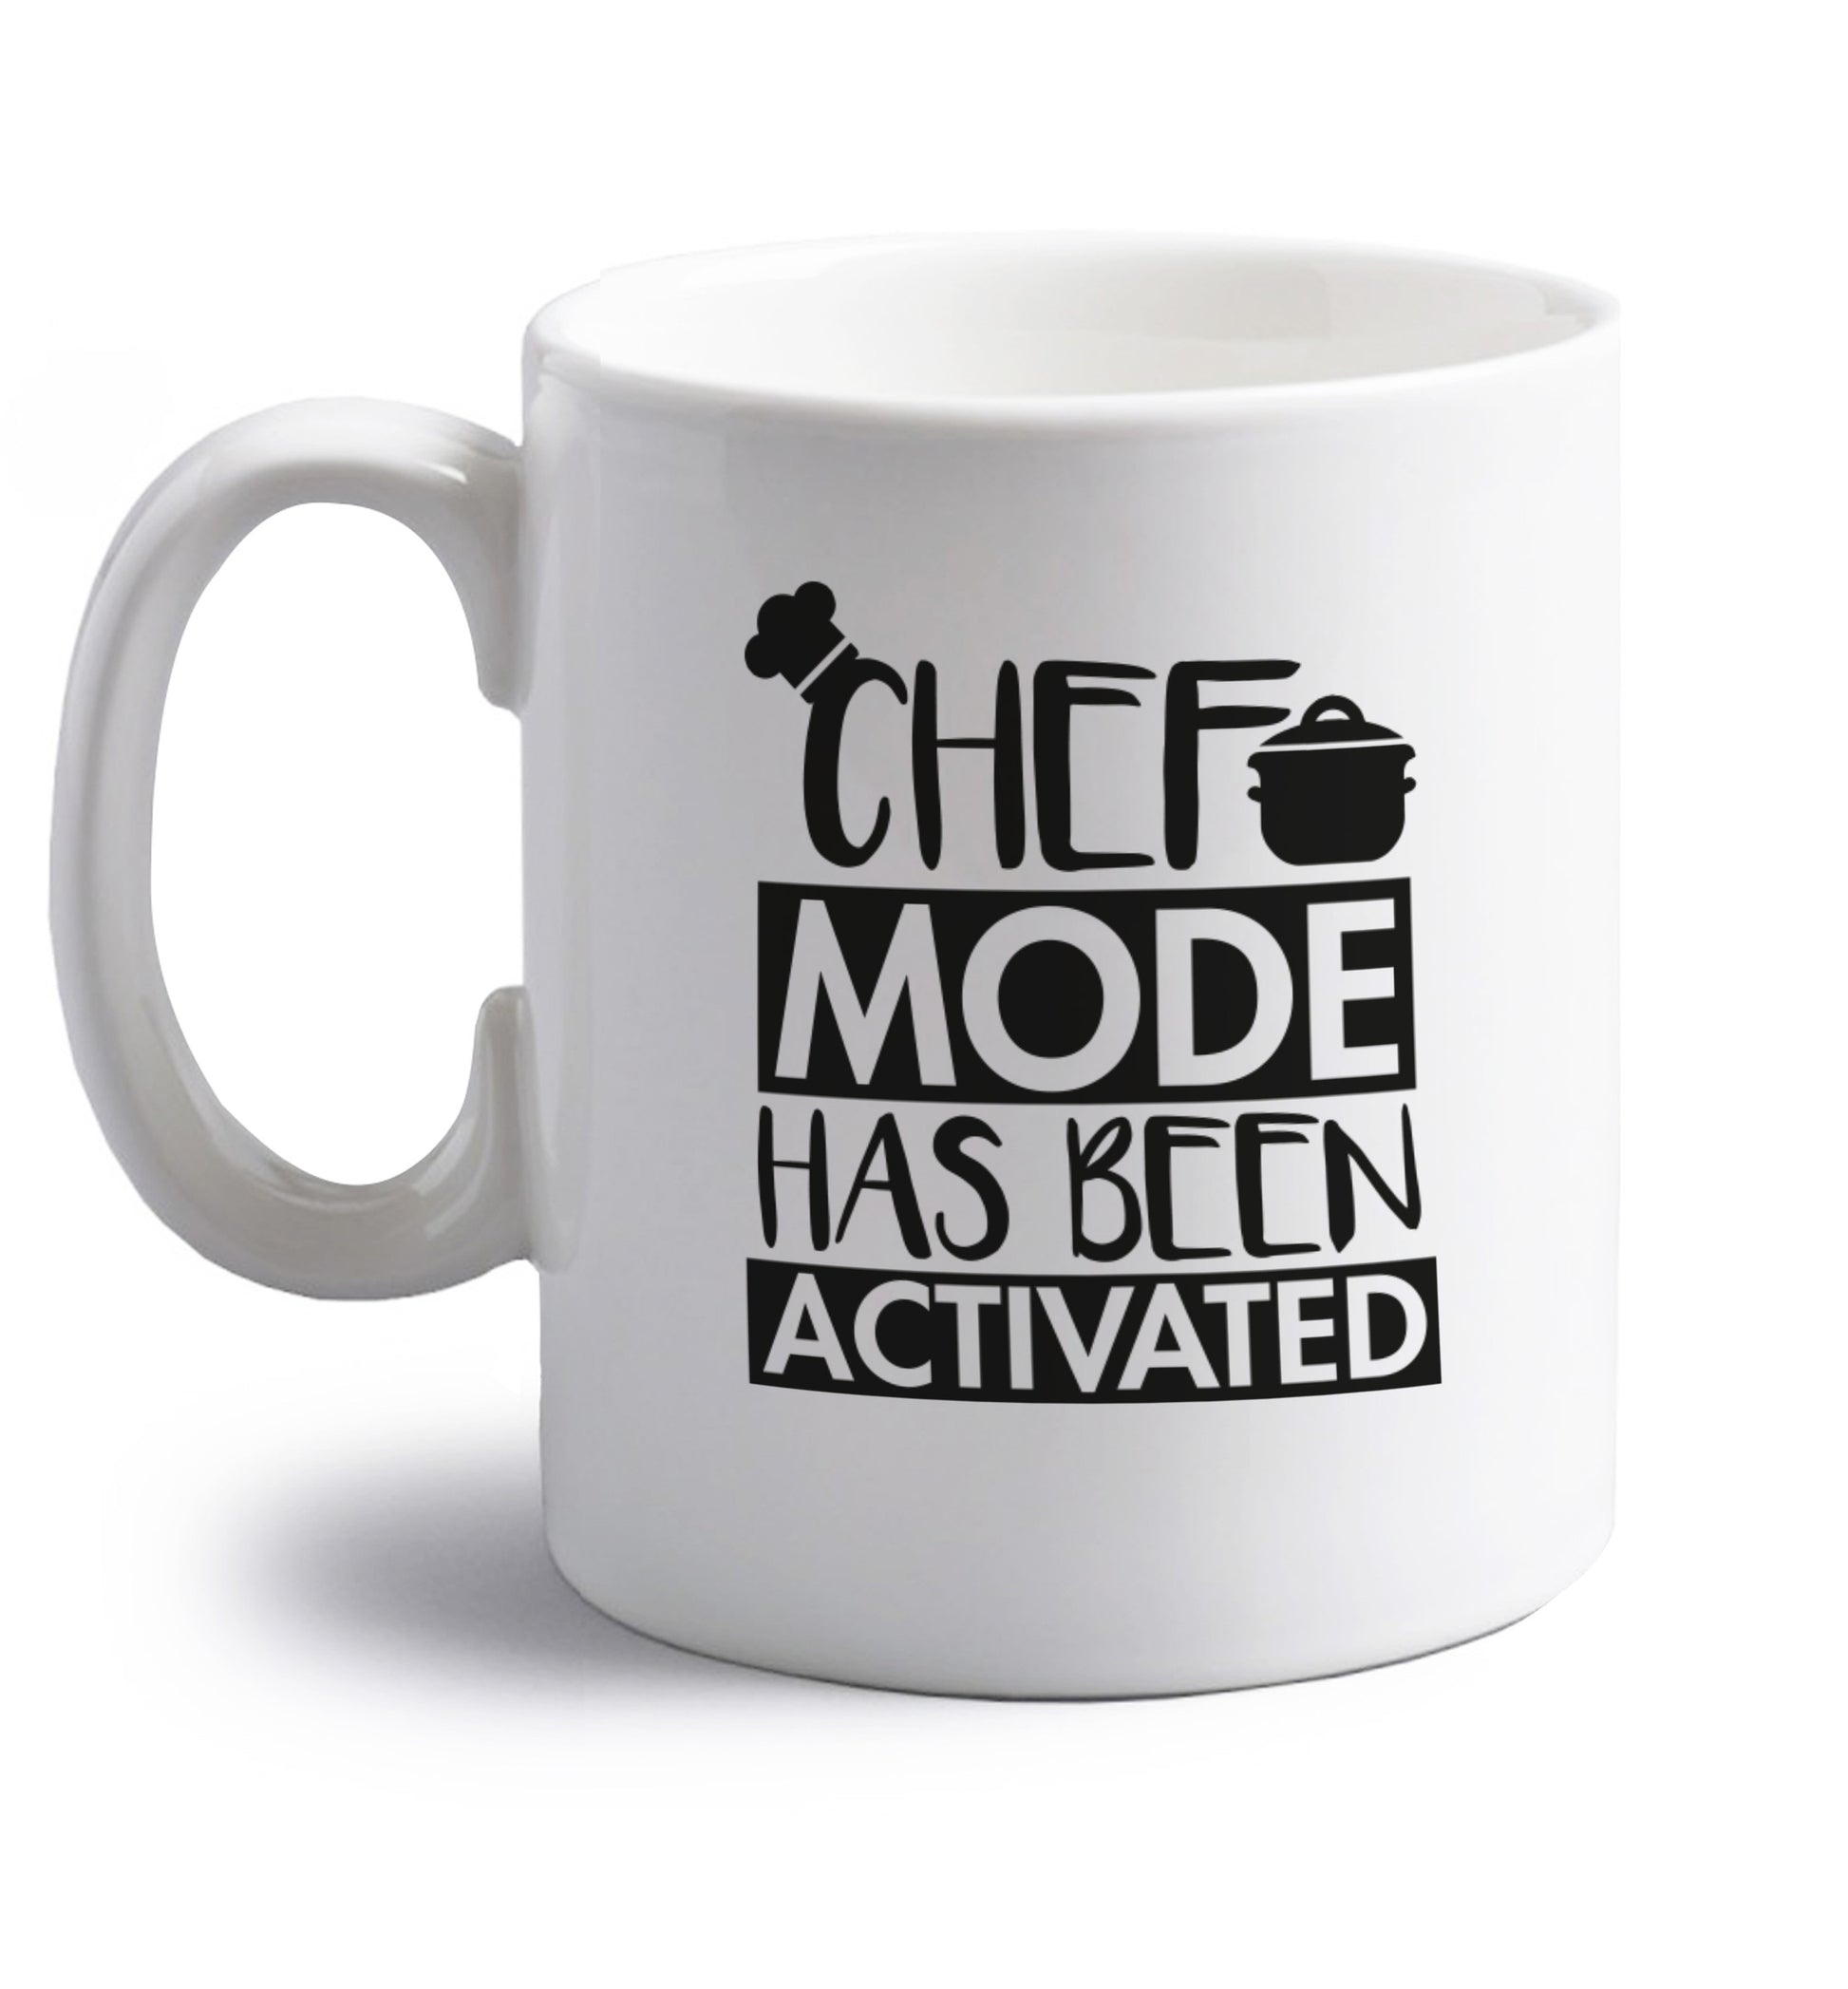 Chef mode has been activated right handed white ceramic mug 